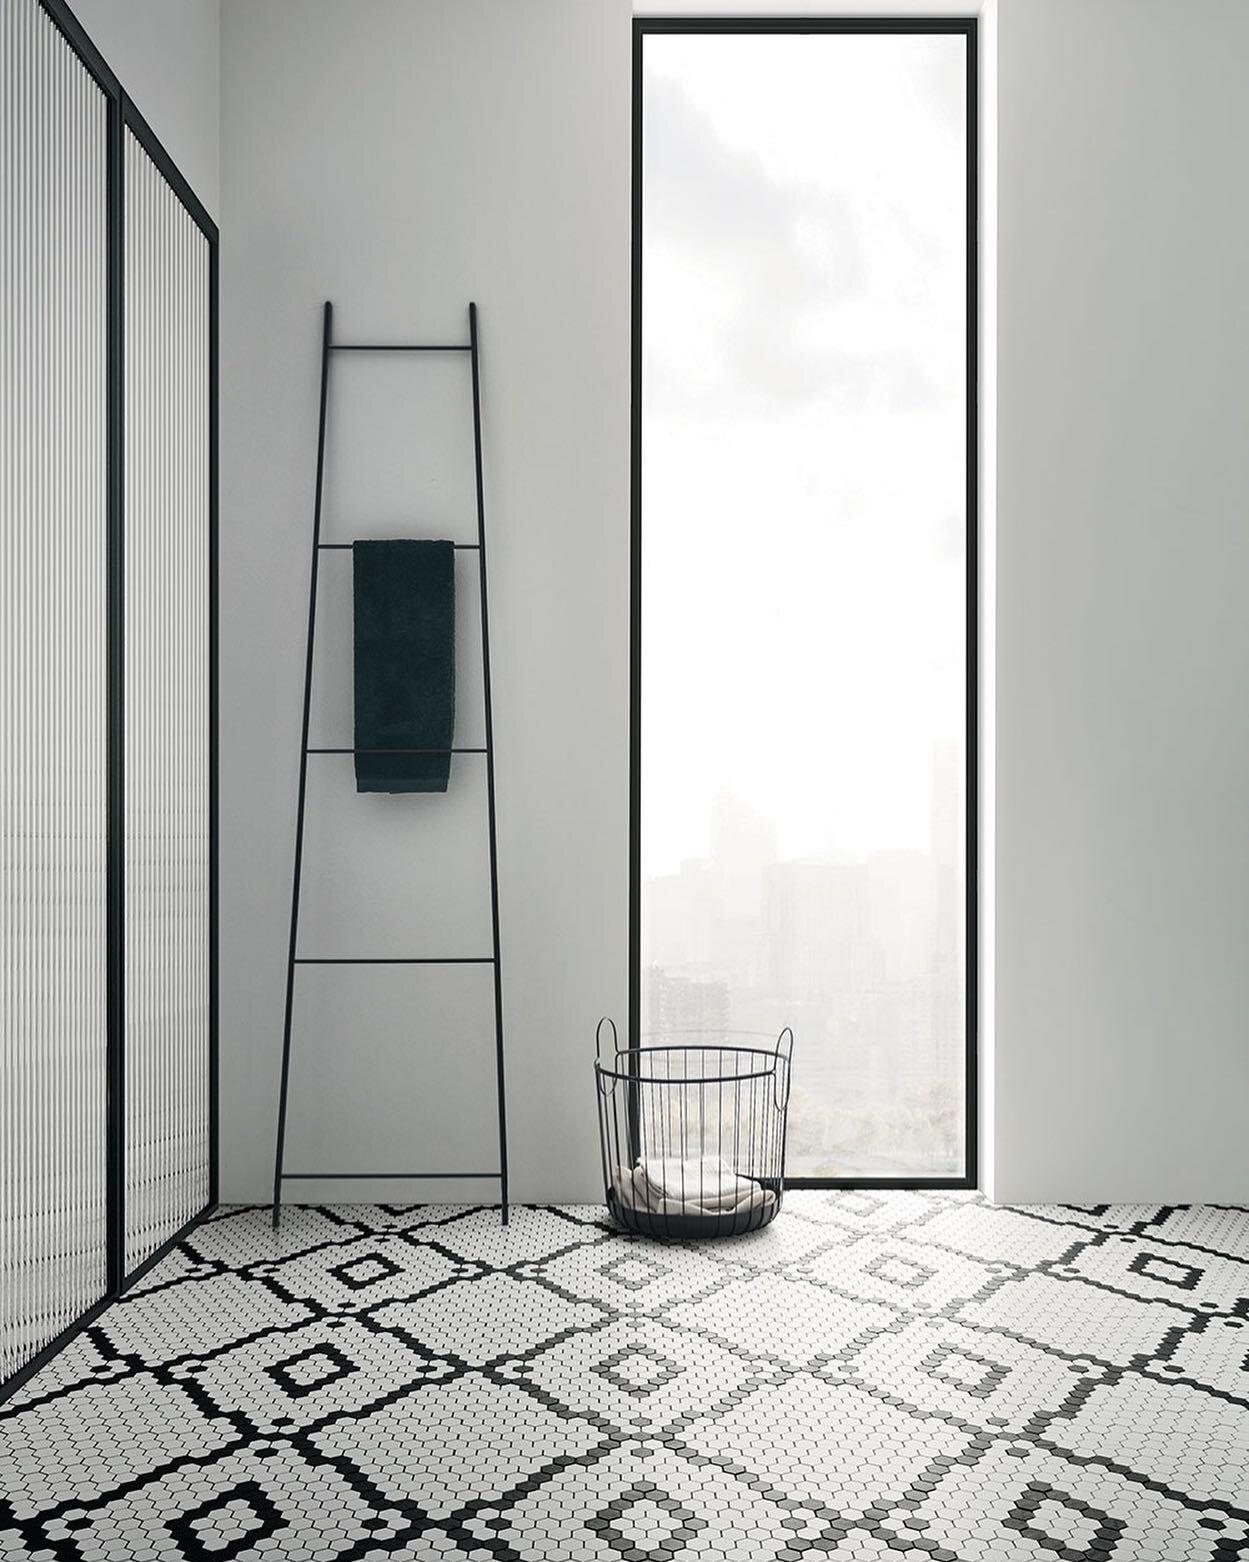 (1/3) #italian #designbuild 🖤🤍 This morning&rsquo;s bathroom possibilities by our one and only @arbi_arredobagno - visit our website or DM us for pricing info 💫
.
.
.
#urban #interiordesign #kitchenandbath #designer #blackandwhite #inspiration #ne